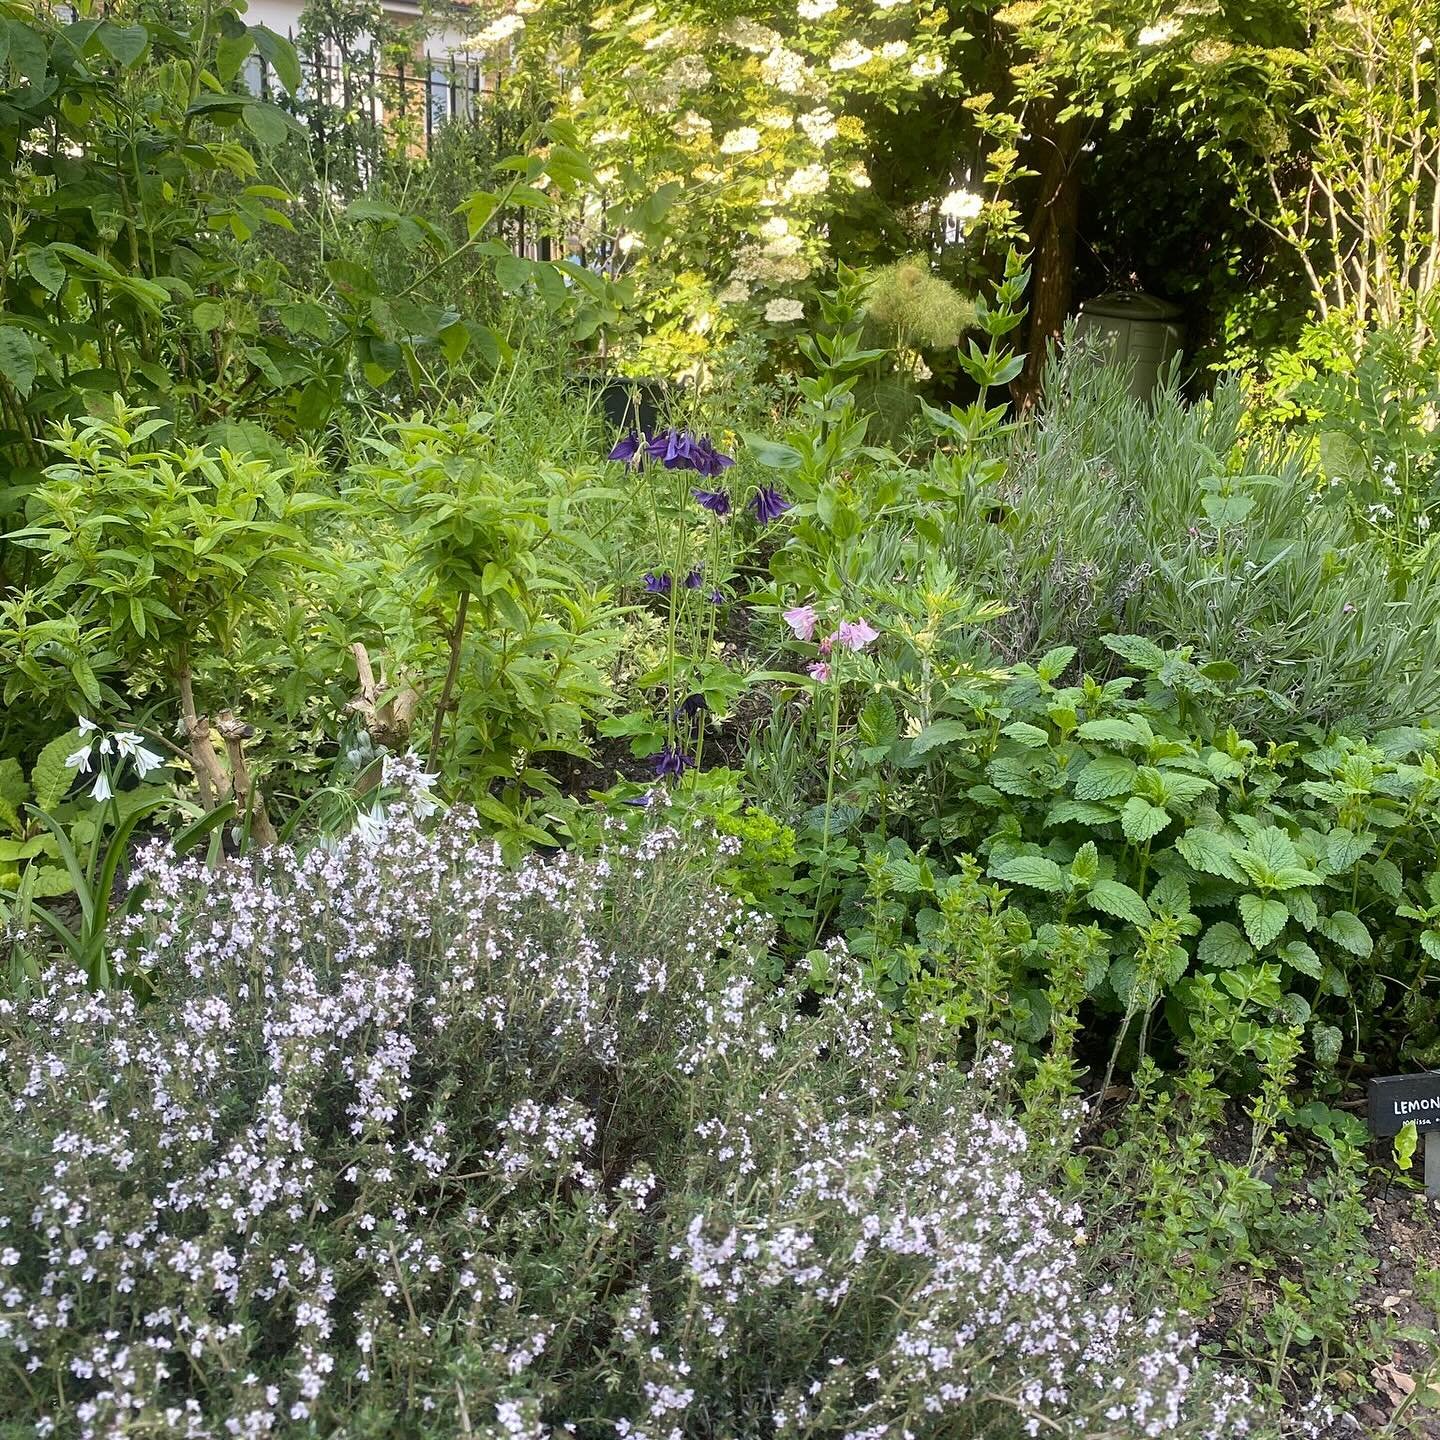 Plant Sale + Garden Open Afternoon this Saturday 🌞🪴🫖🌱🐝

Come and see the garden in its late spring glory and pick up some plants for your own garden this weekend. We&rsquo;ll have a range of herbs, flowers and edible plants.

Saturday 11 May 2:3